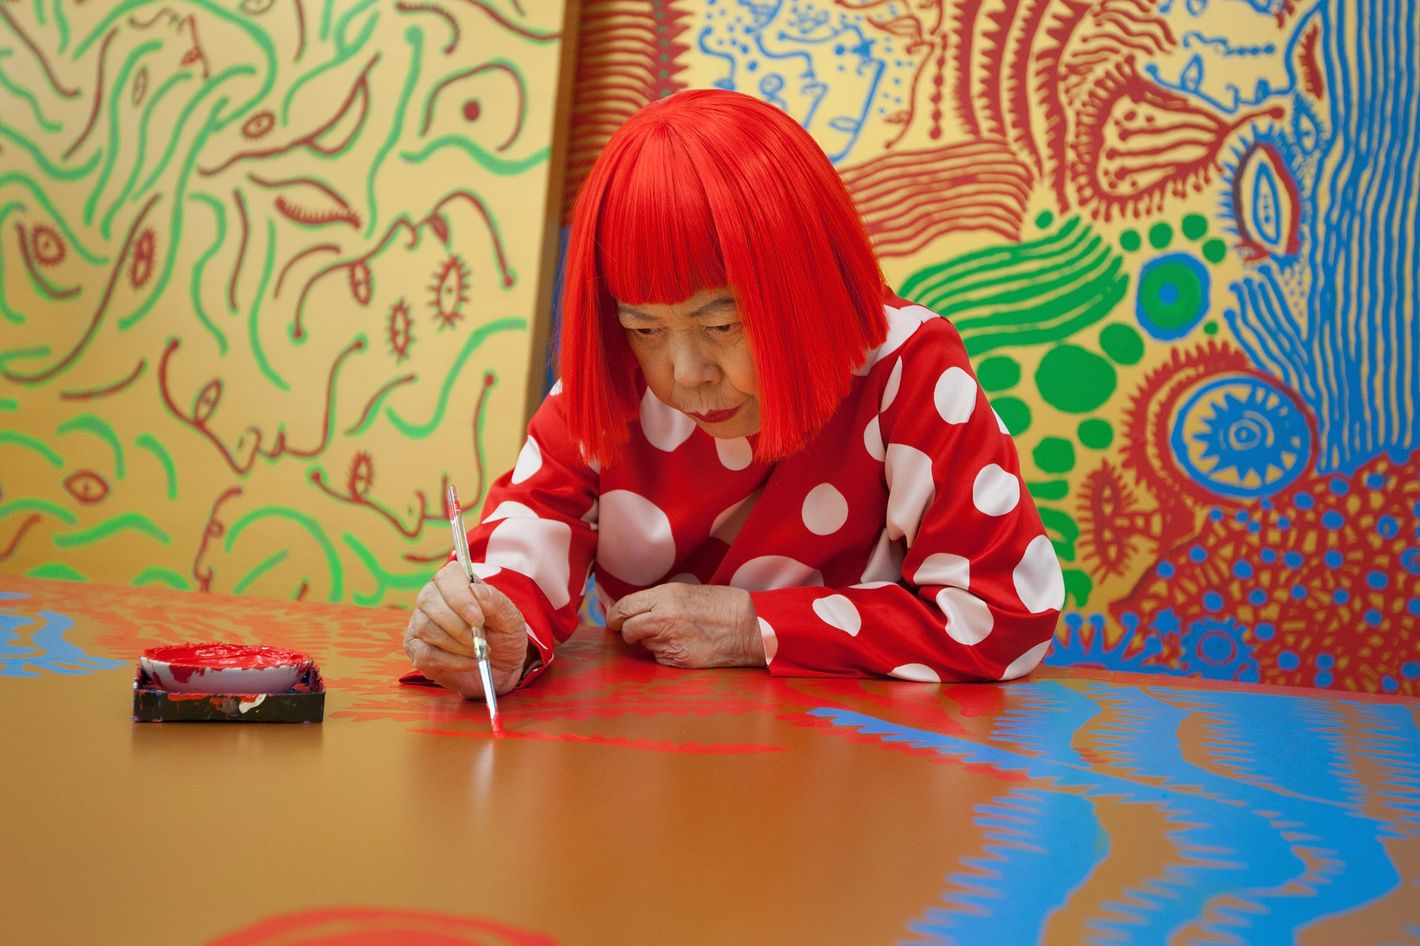 Louis Vuitton unveils second collaboration with Yayoi Kusama